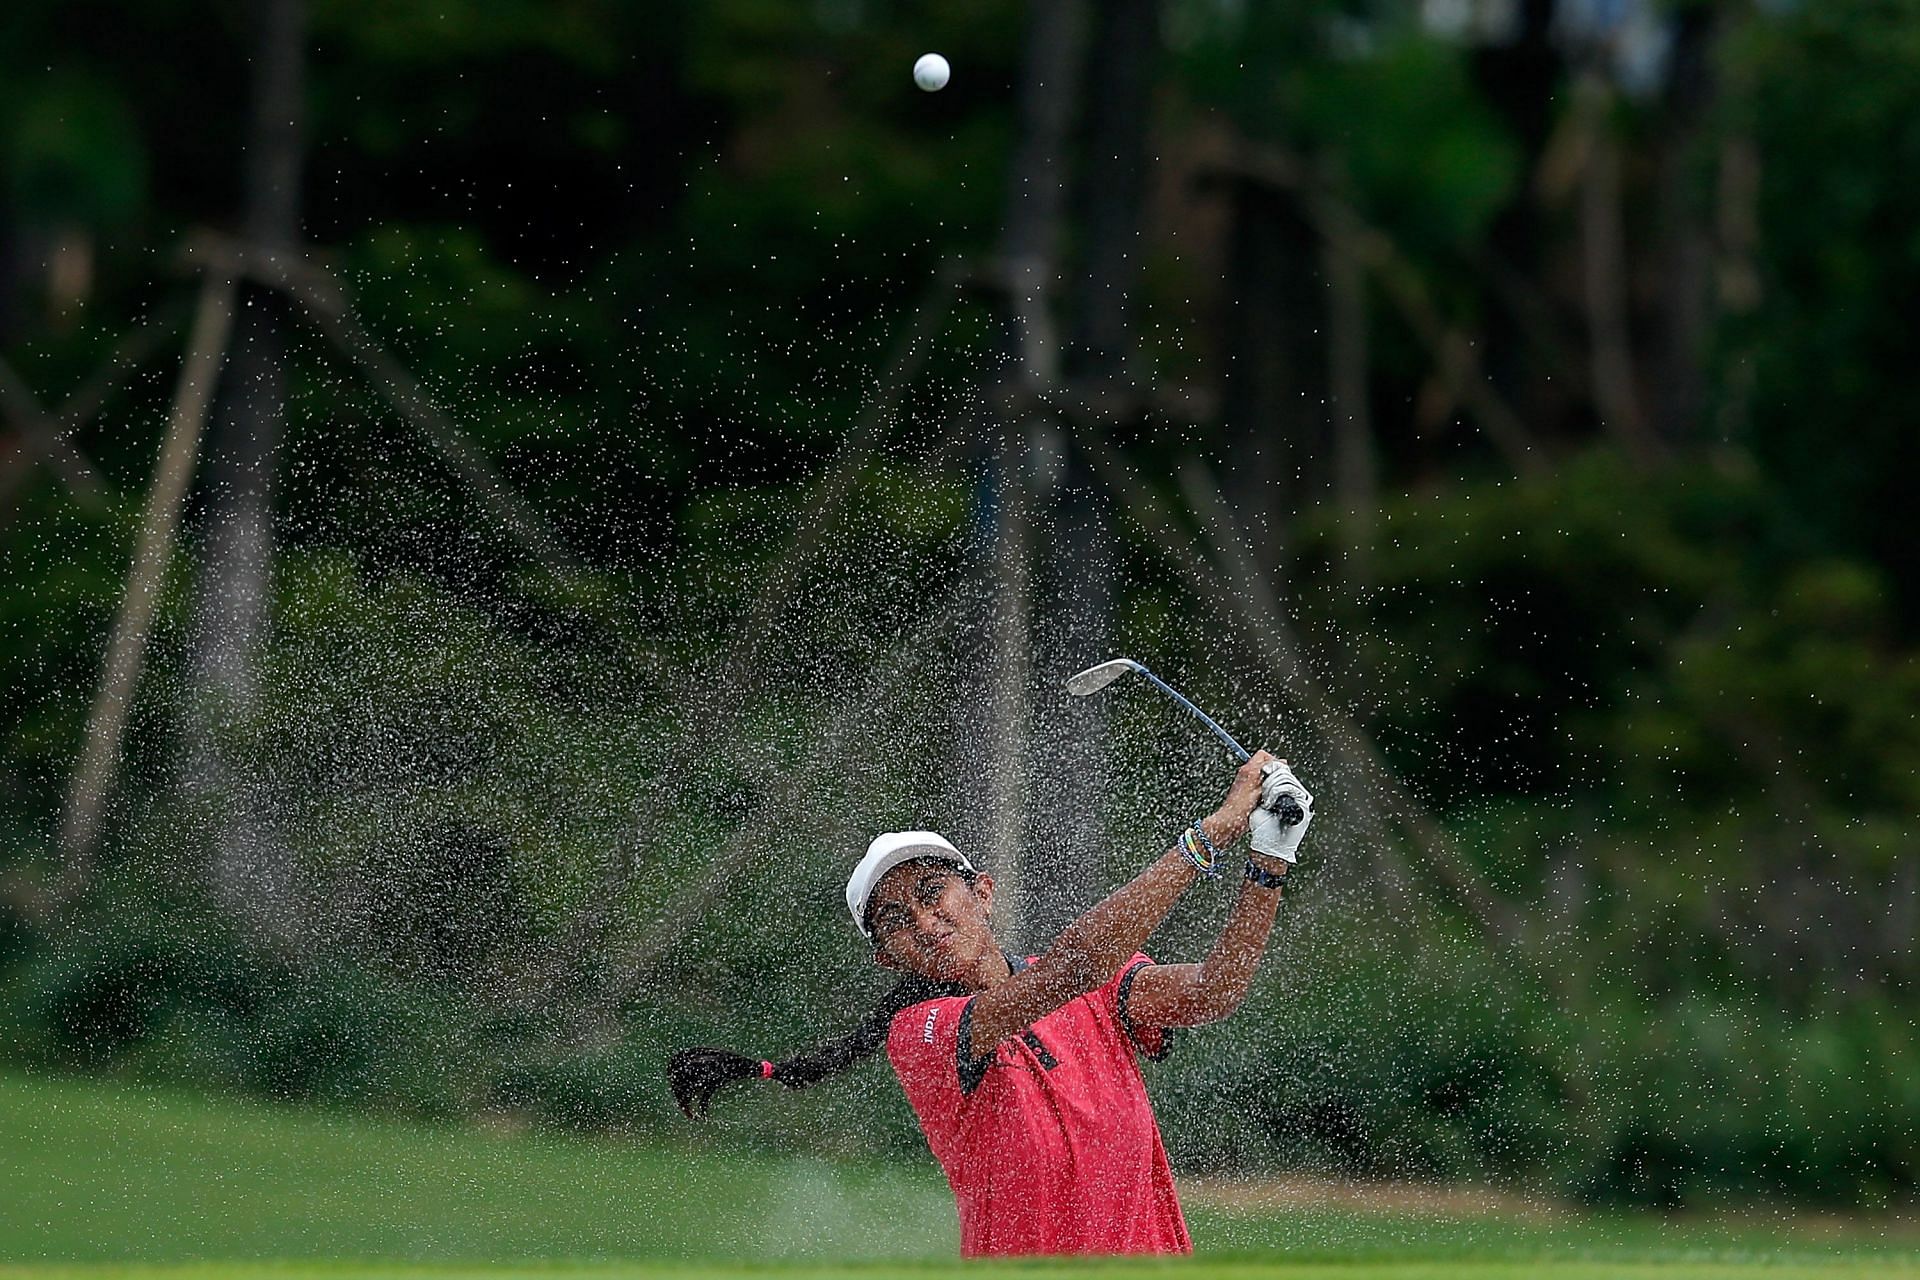 Aditi Ashok at the 2014 Summer Youth Olympic Games (Image via Getty)